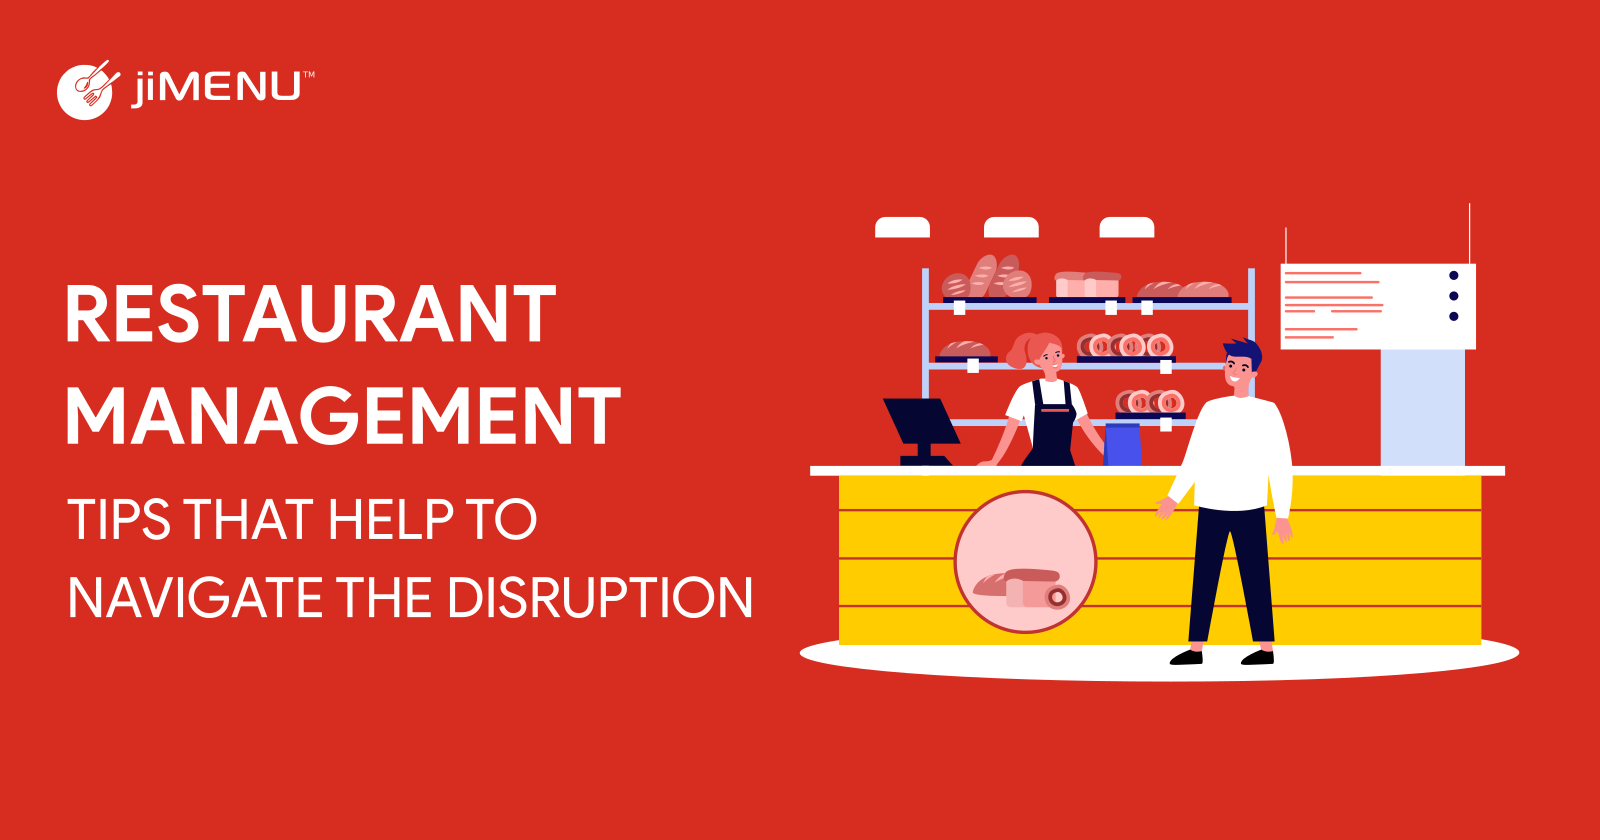 Restaurant Management Tips To Navigate The Disruption During The Pandemic